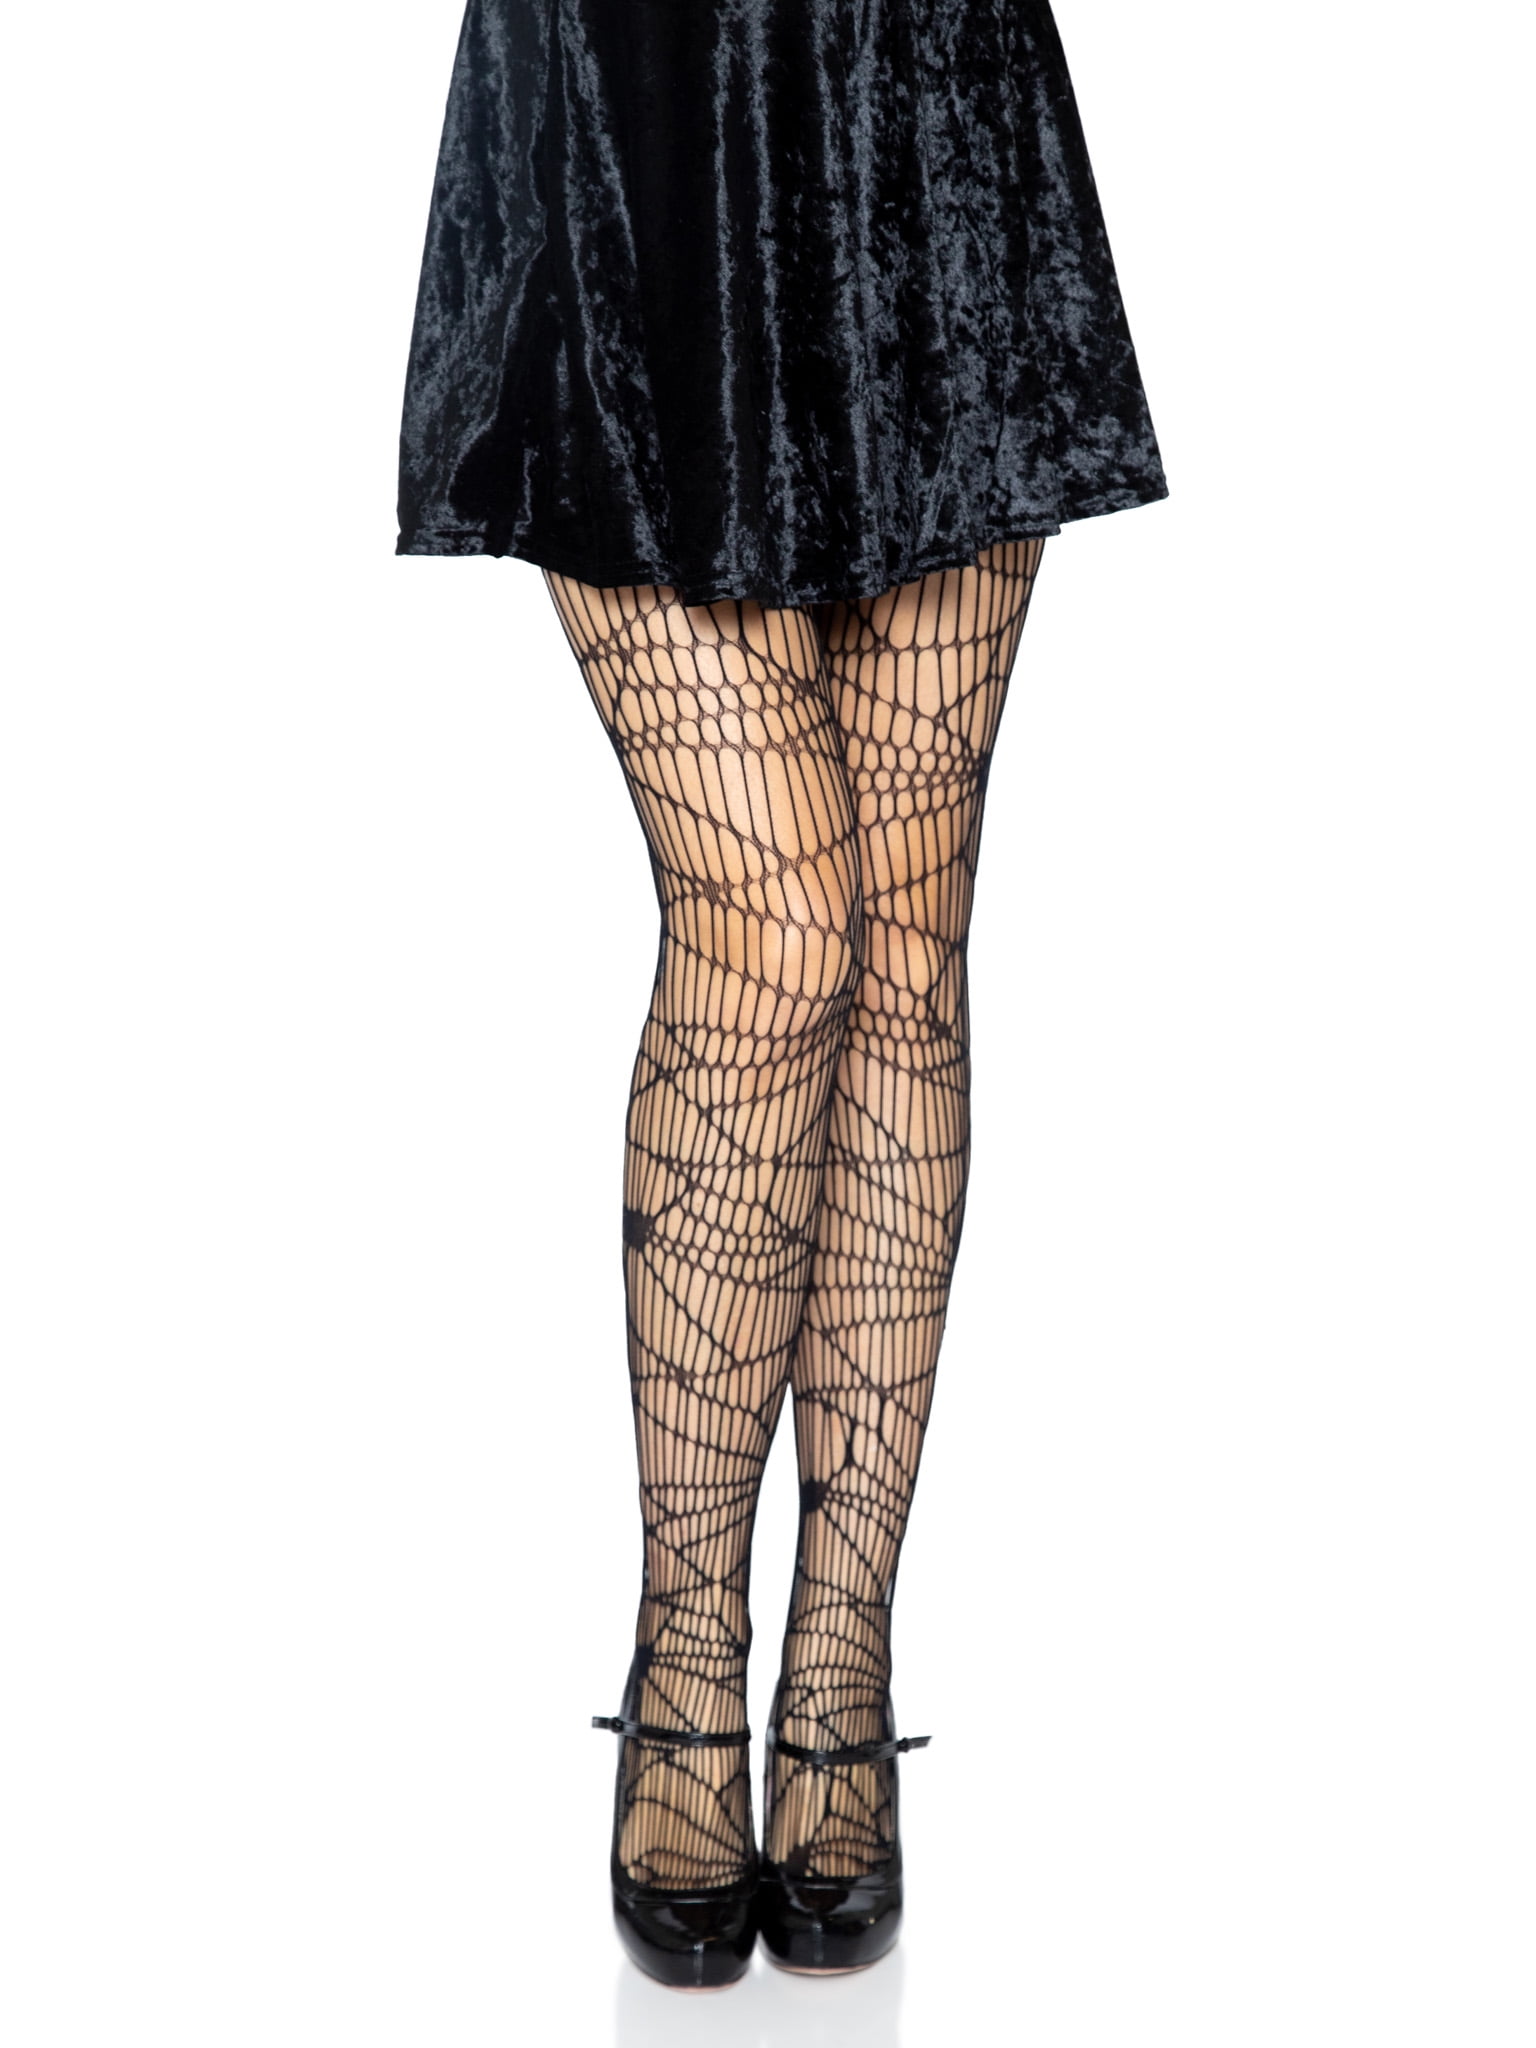 Way to Celebrate Fashion Halloween Female Adult Spider Web Net Tights,  Black, One Size 